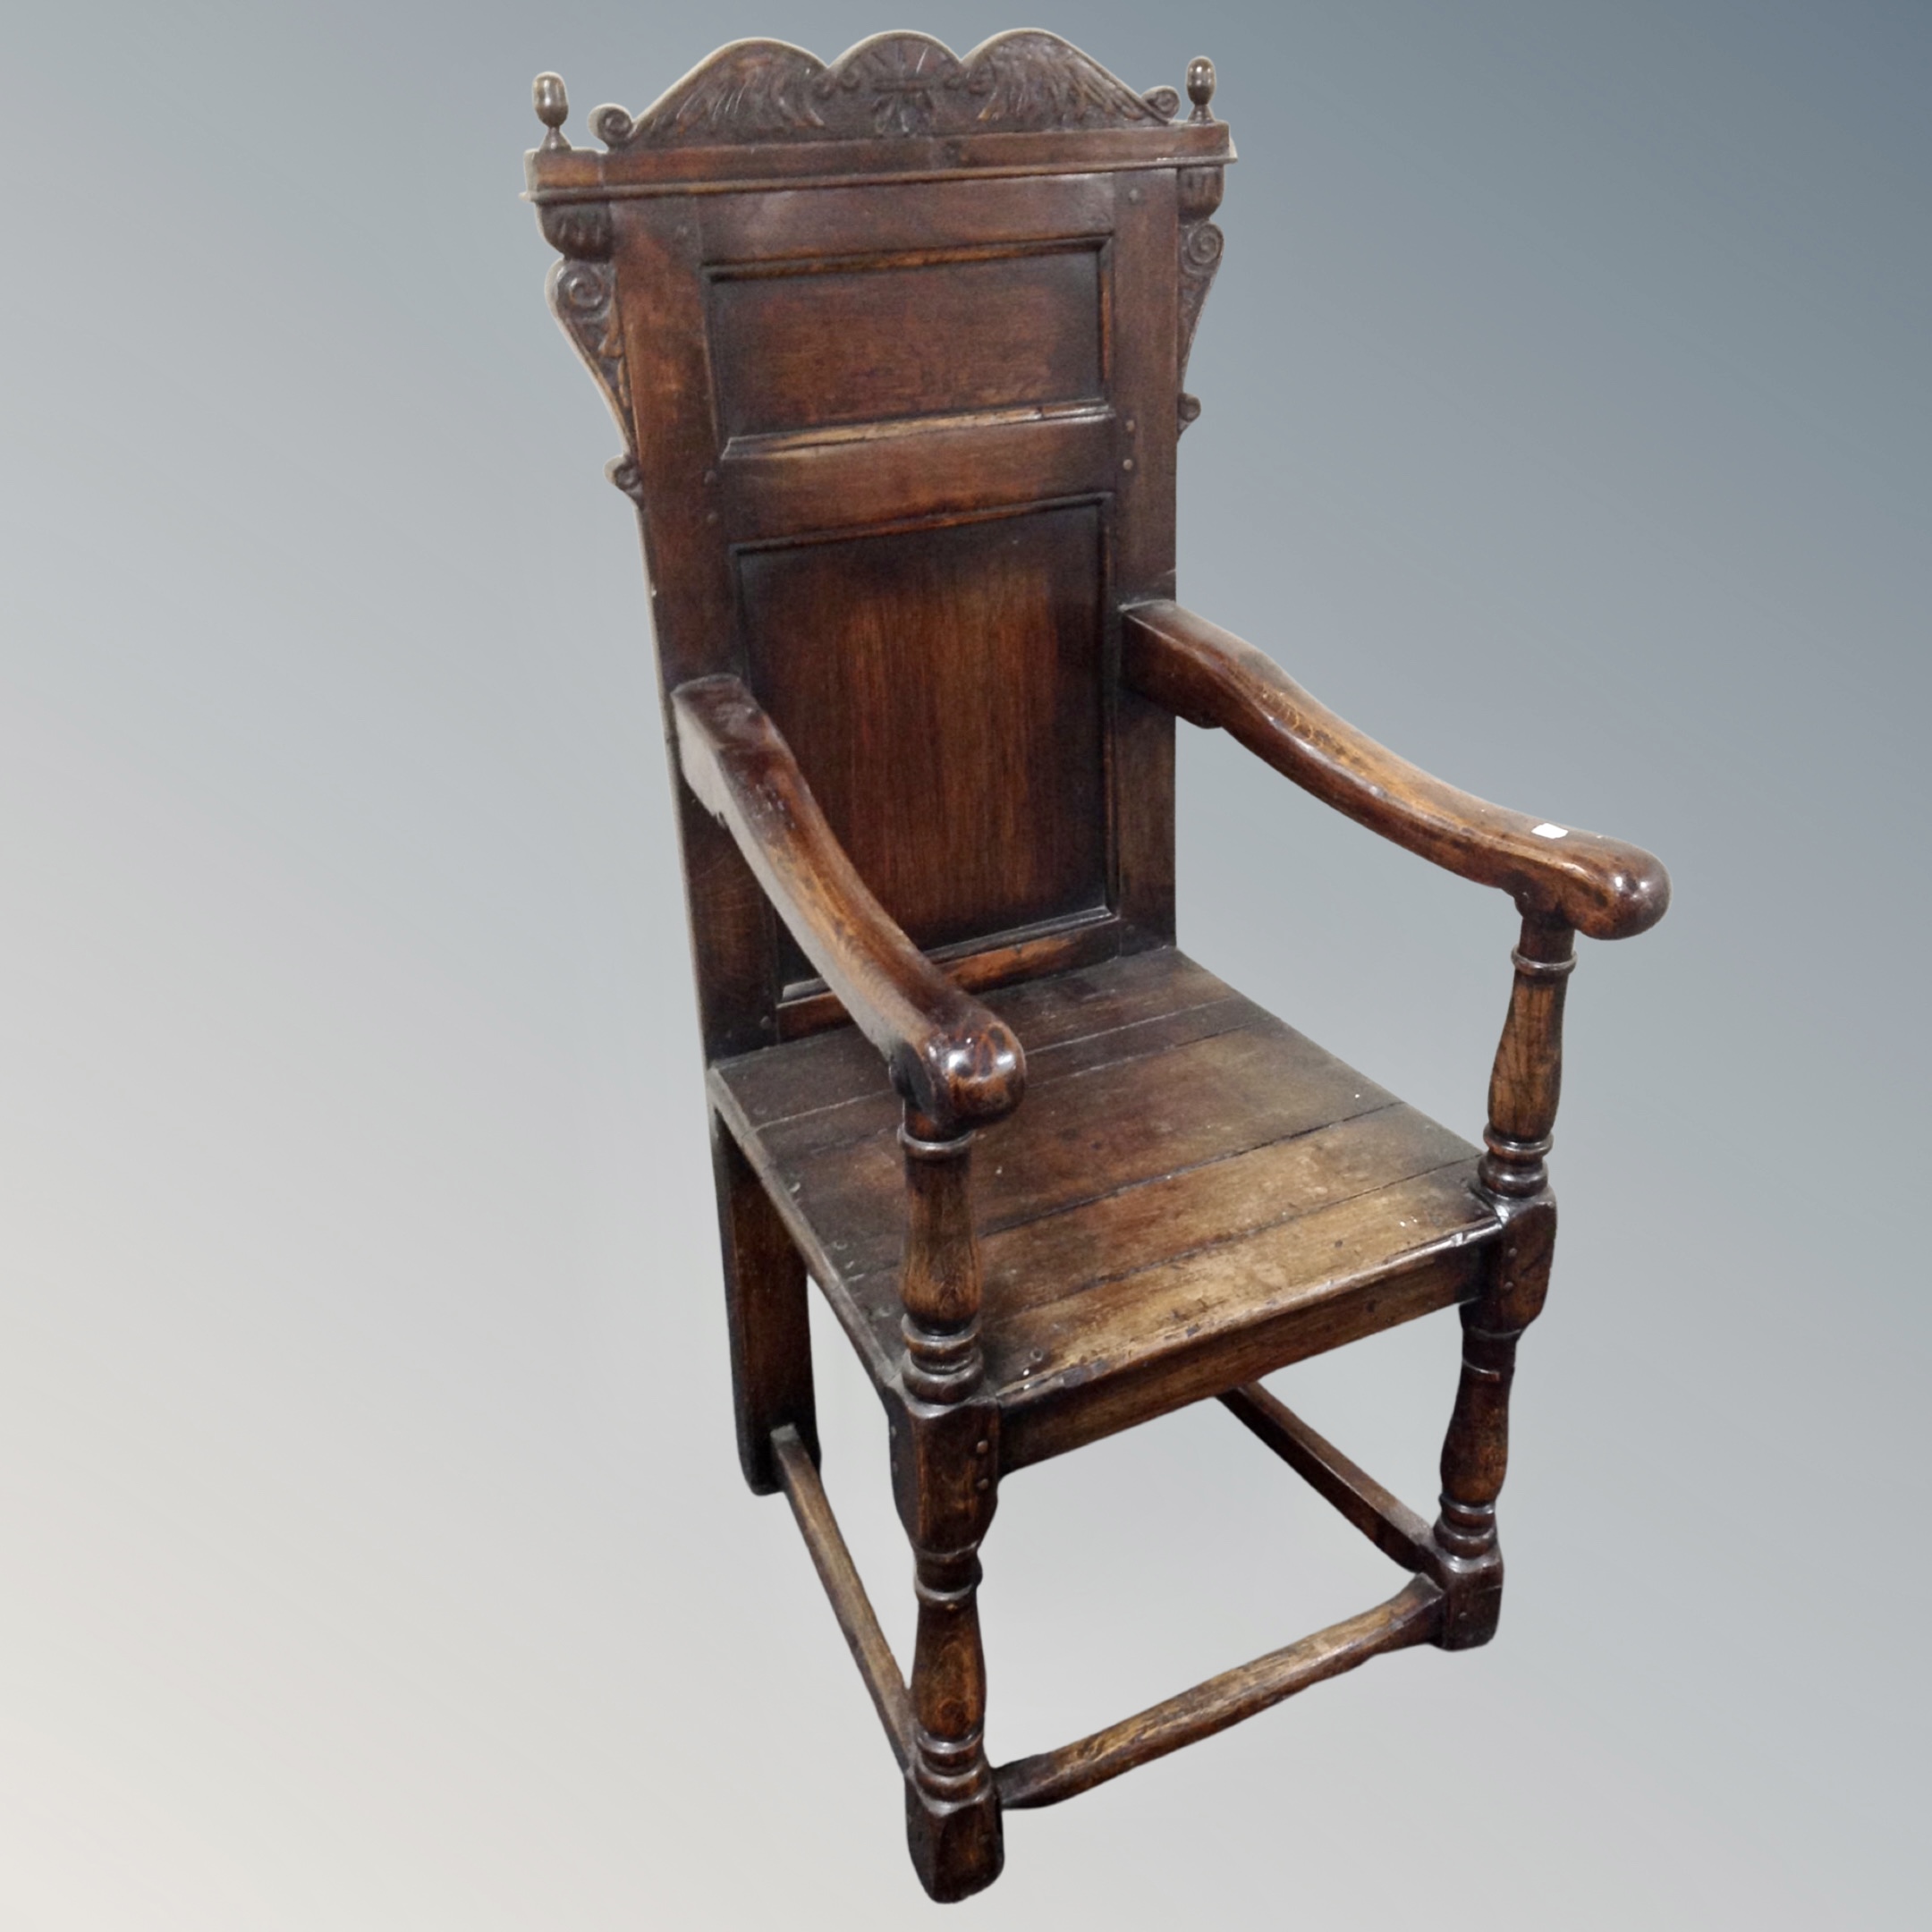 A 19th century joined oak Wainscot style armchair